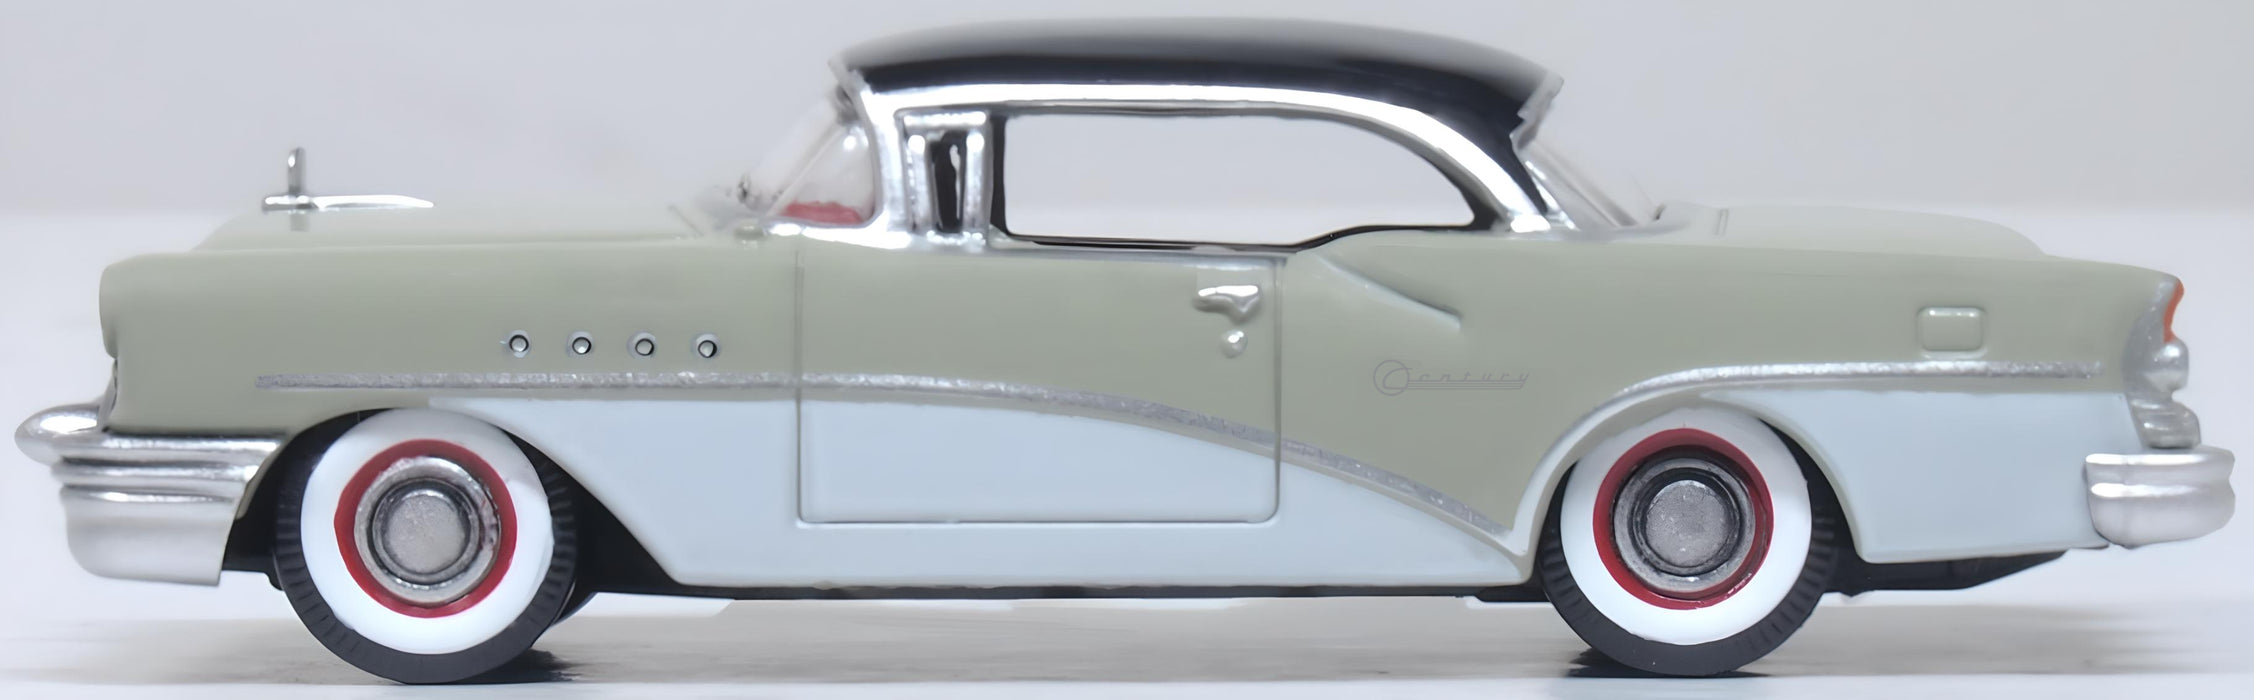 Model of the Buick Century 1955 Carlsbad Black/Windsor Grey/Dover White by Oxford at 1:87 scale left